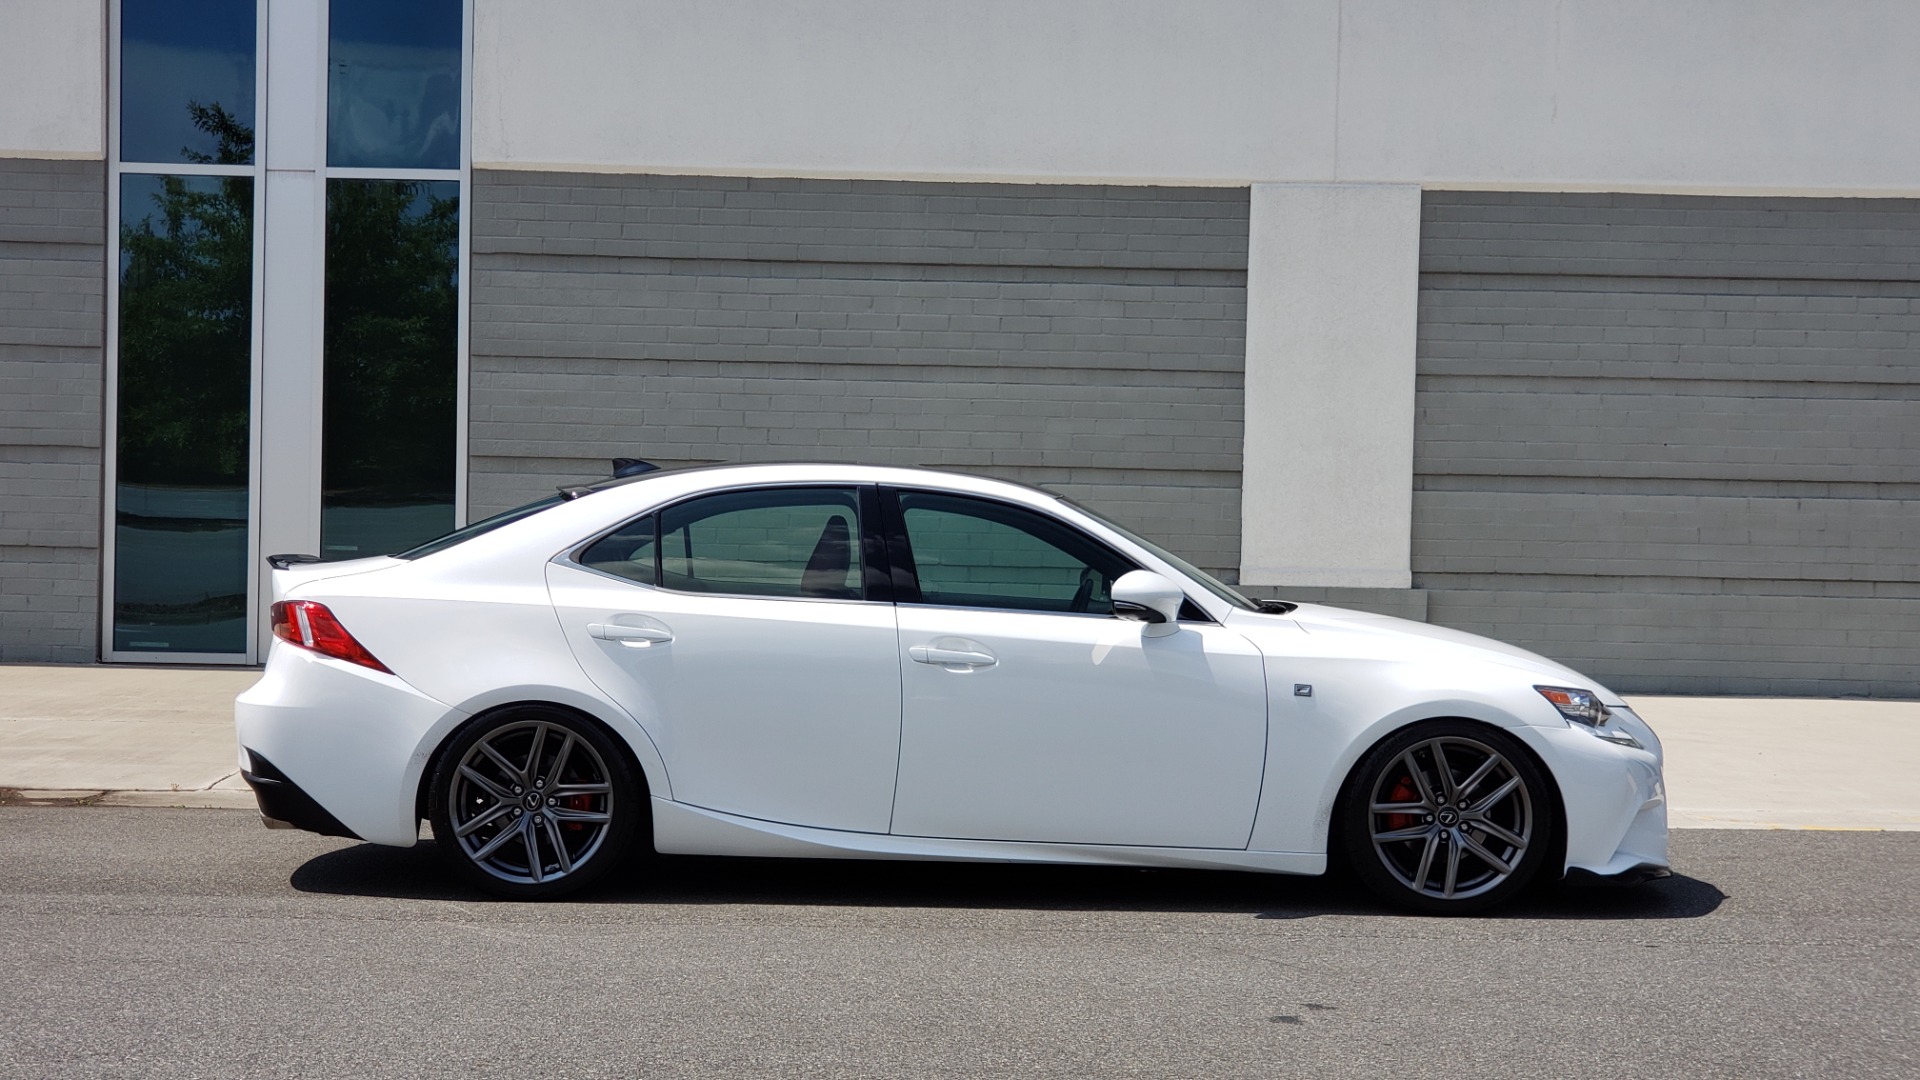 Used 2014 Lexus IS 250 F-SPORT SEDAN / BLIND SPOT MONITOR / REARVIEW / 18IN WHEELS for sale Sold at Formula Imports in Charlotte NC 28227 10